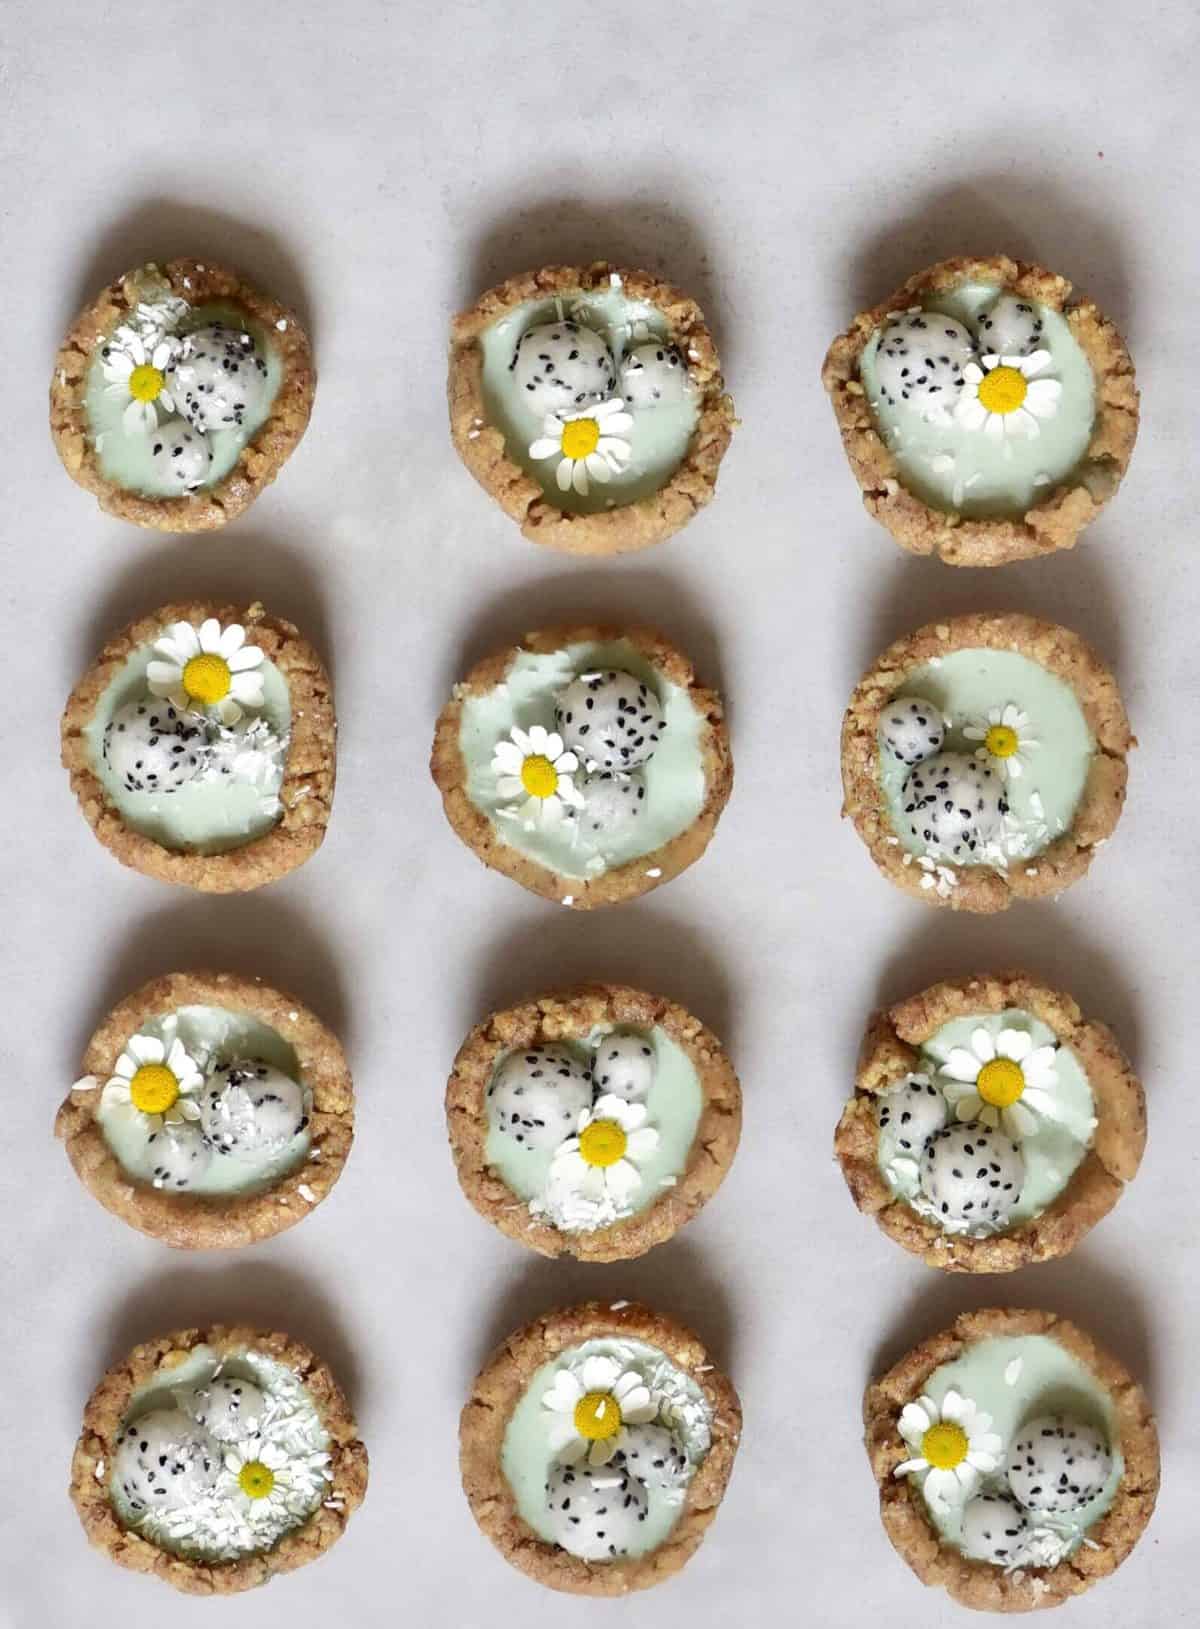 Mini green tarts with dragonfruit balls, coconut, and daisy flowers